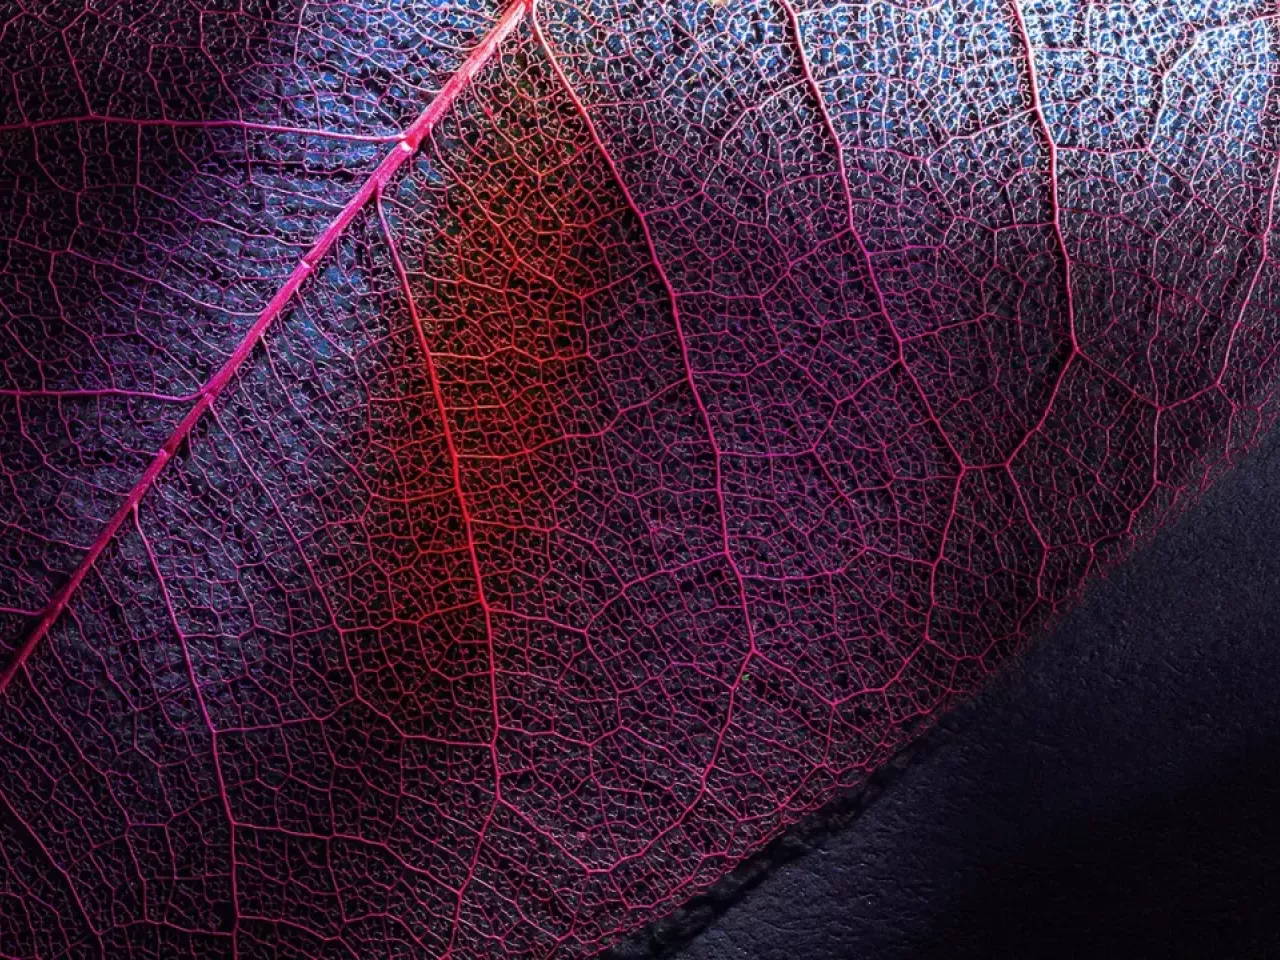 Close up of a leaf with red veins. Shadows cover it.